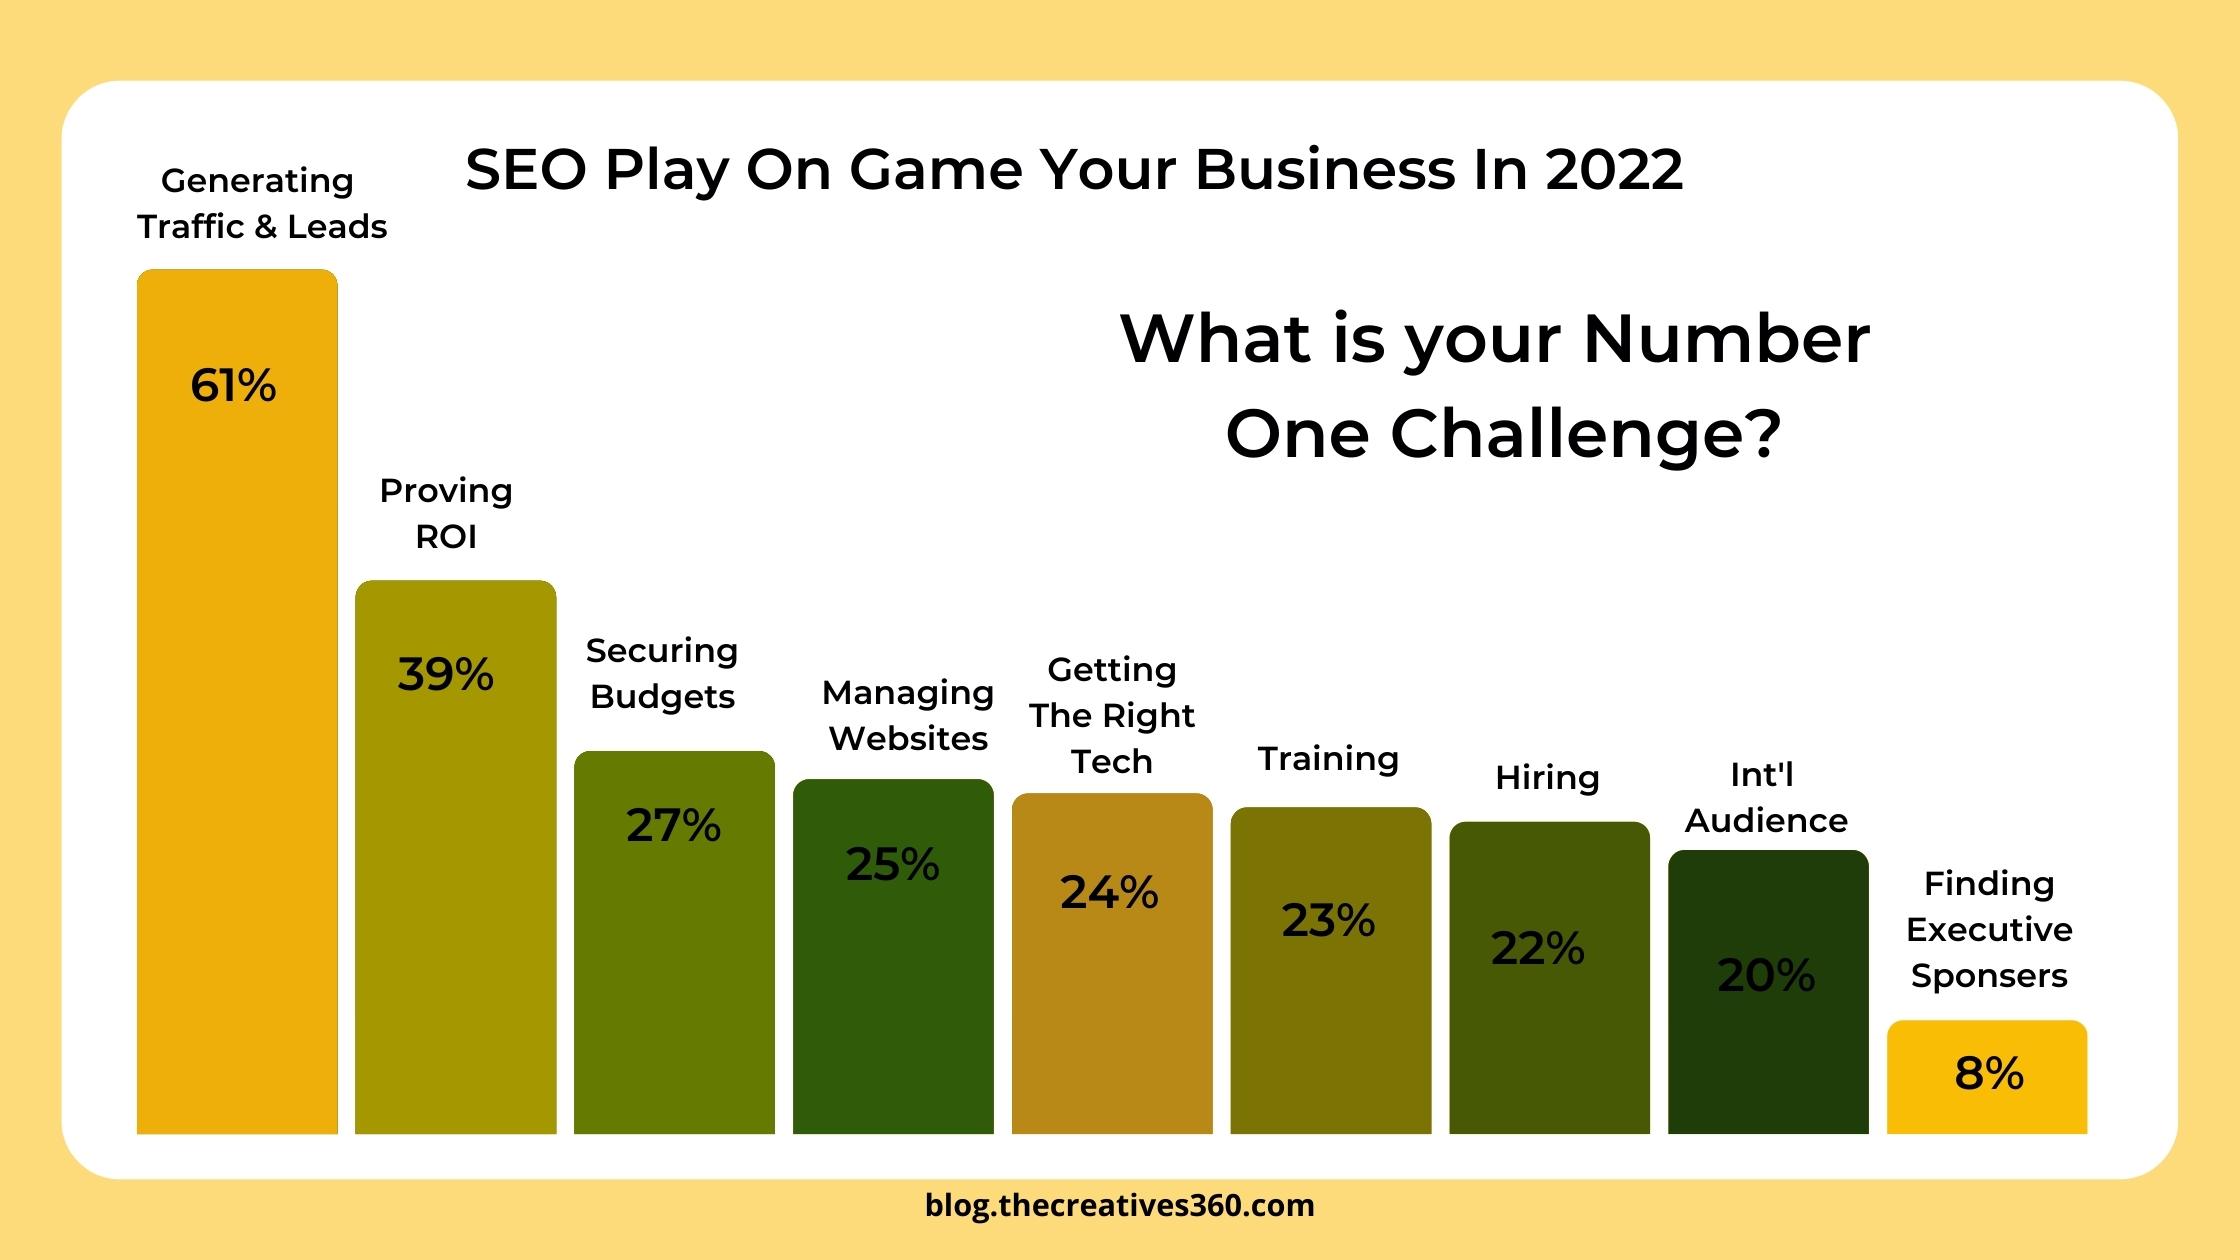 TOP 6 STRATEGIES FOR MARKETING YOUR BUSINESS IN 2022